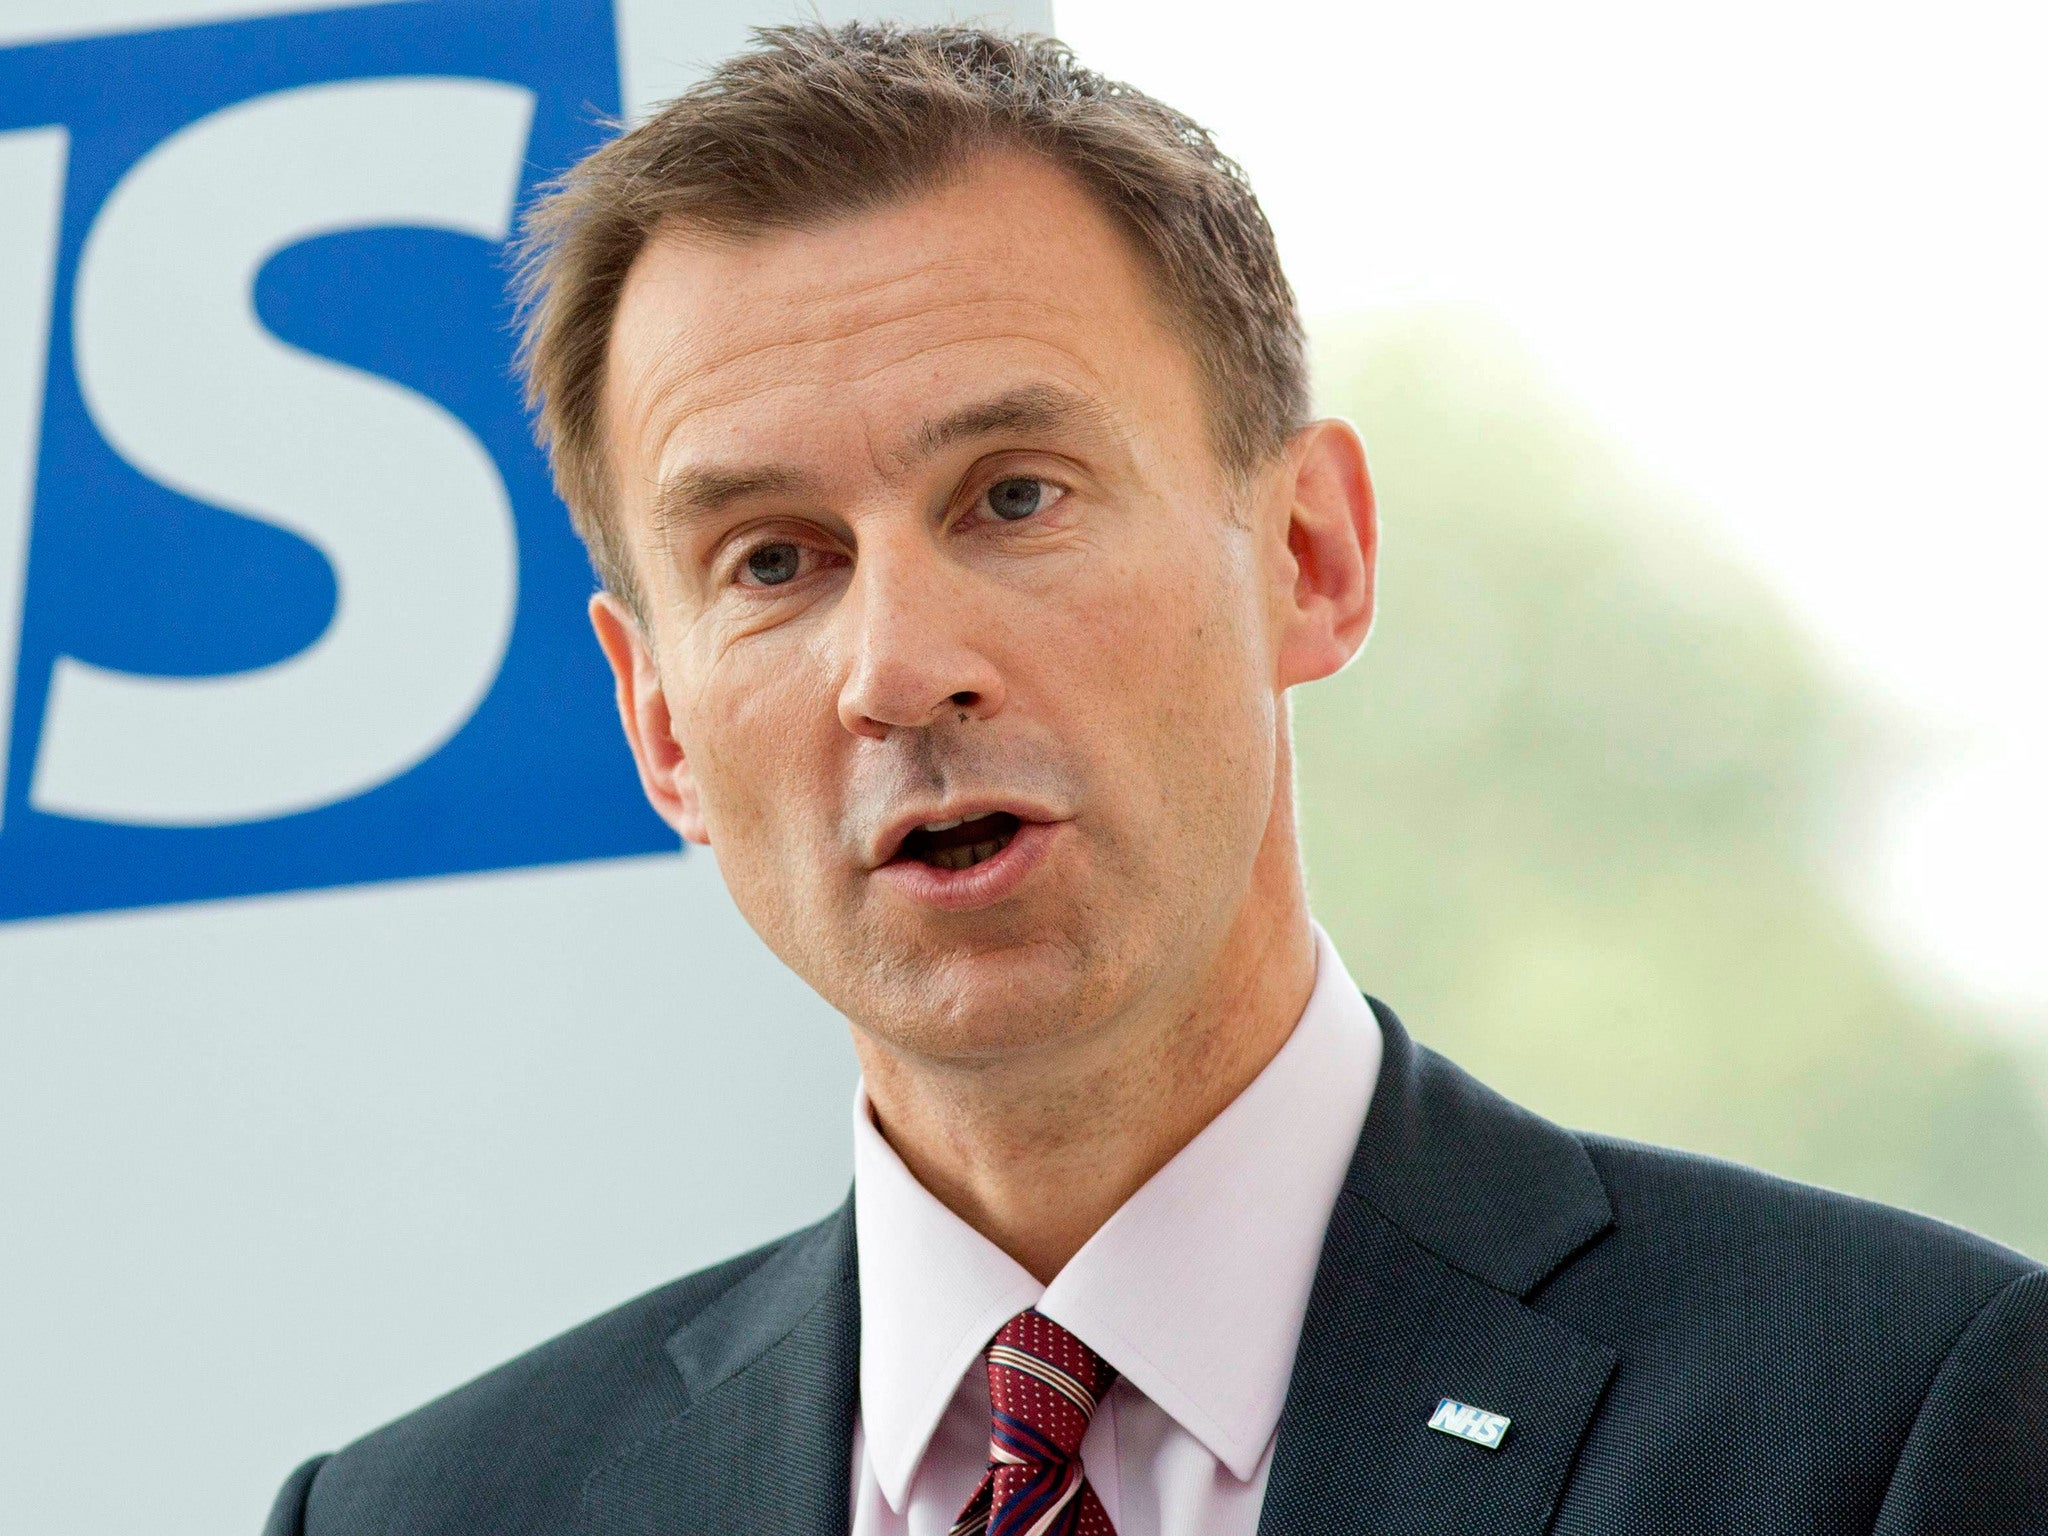 100,000 people want a vote of no confidence debate in Mr Hunt